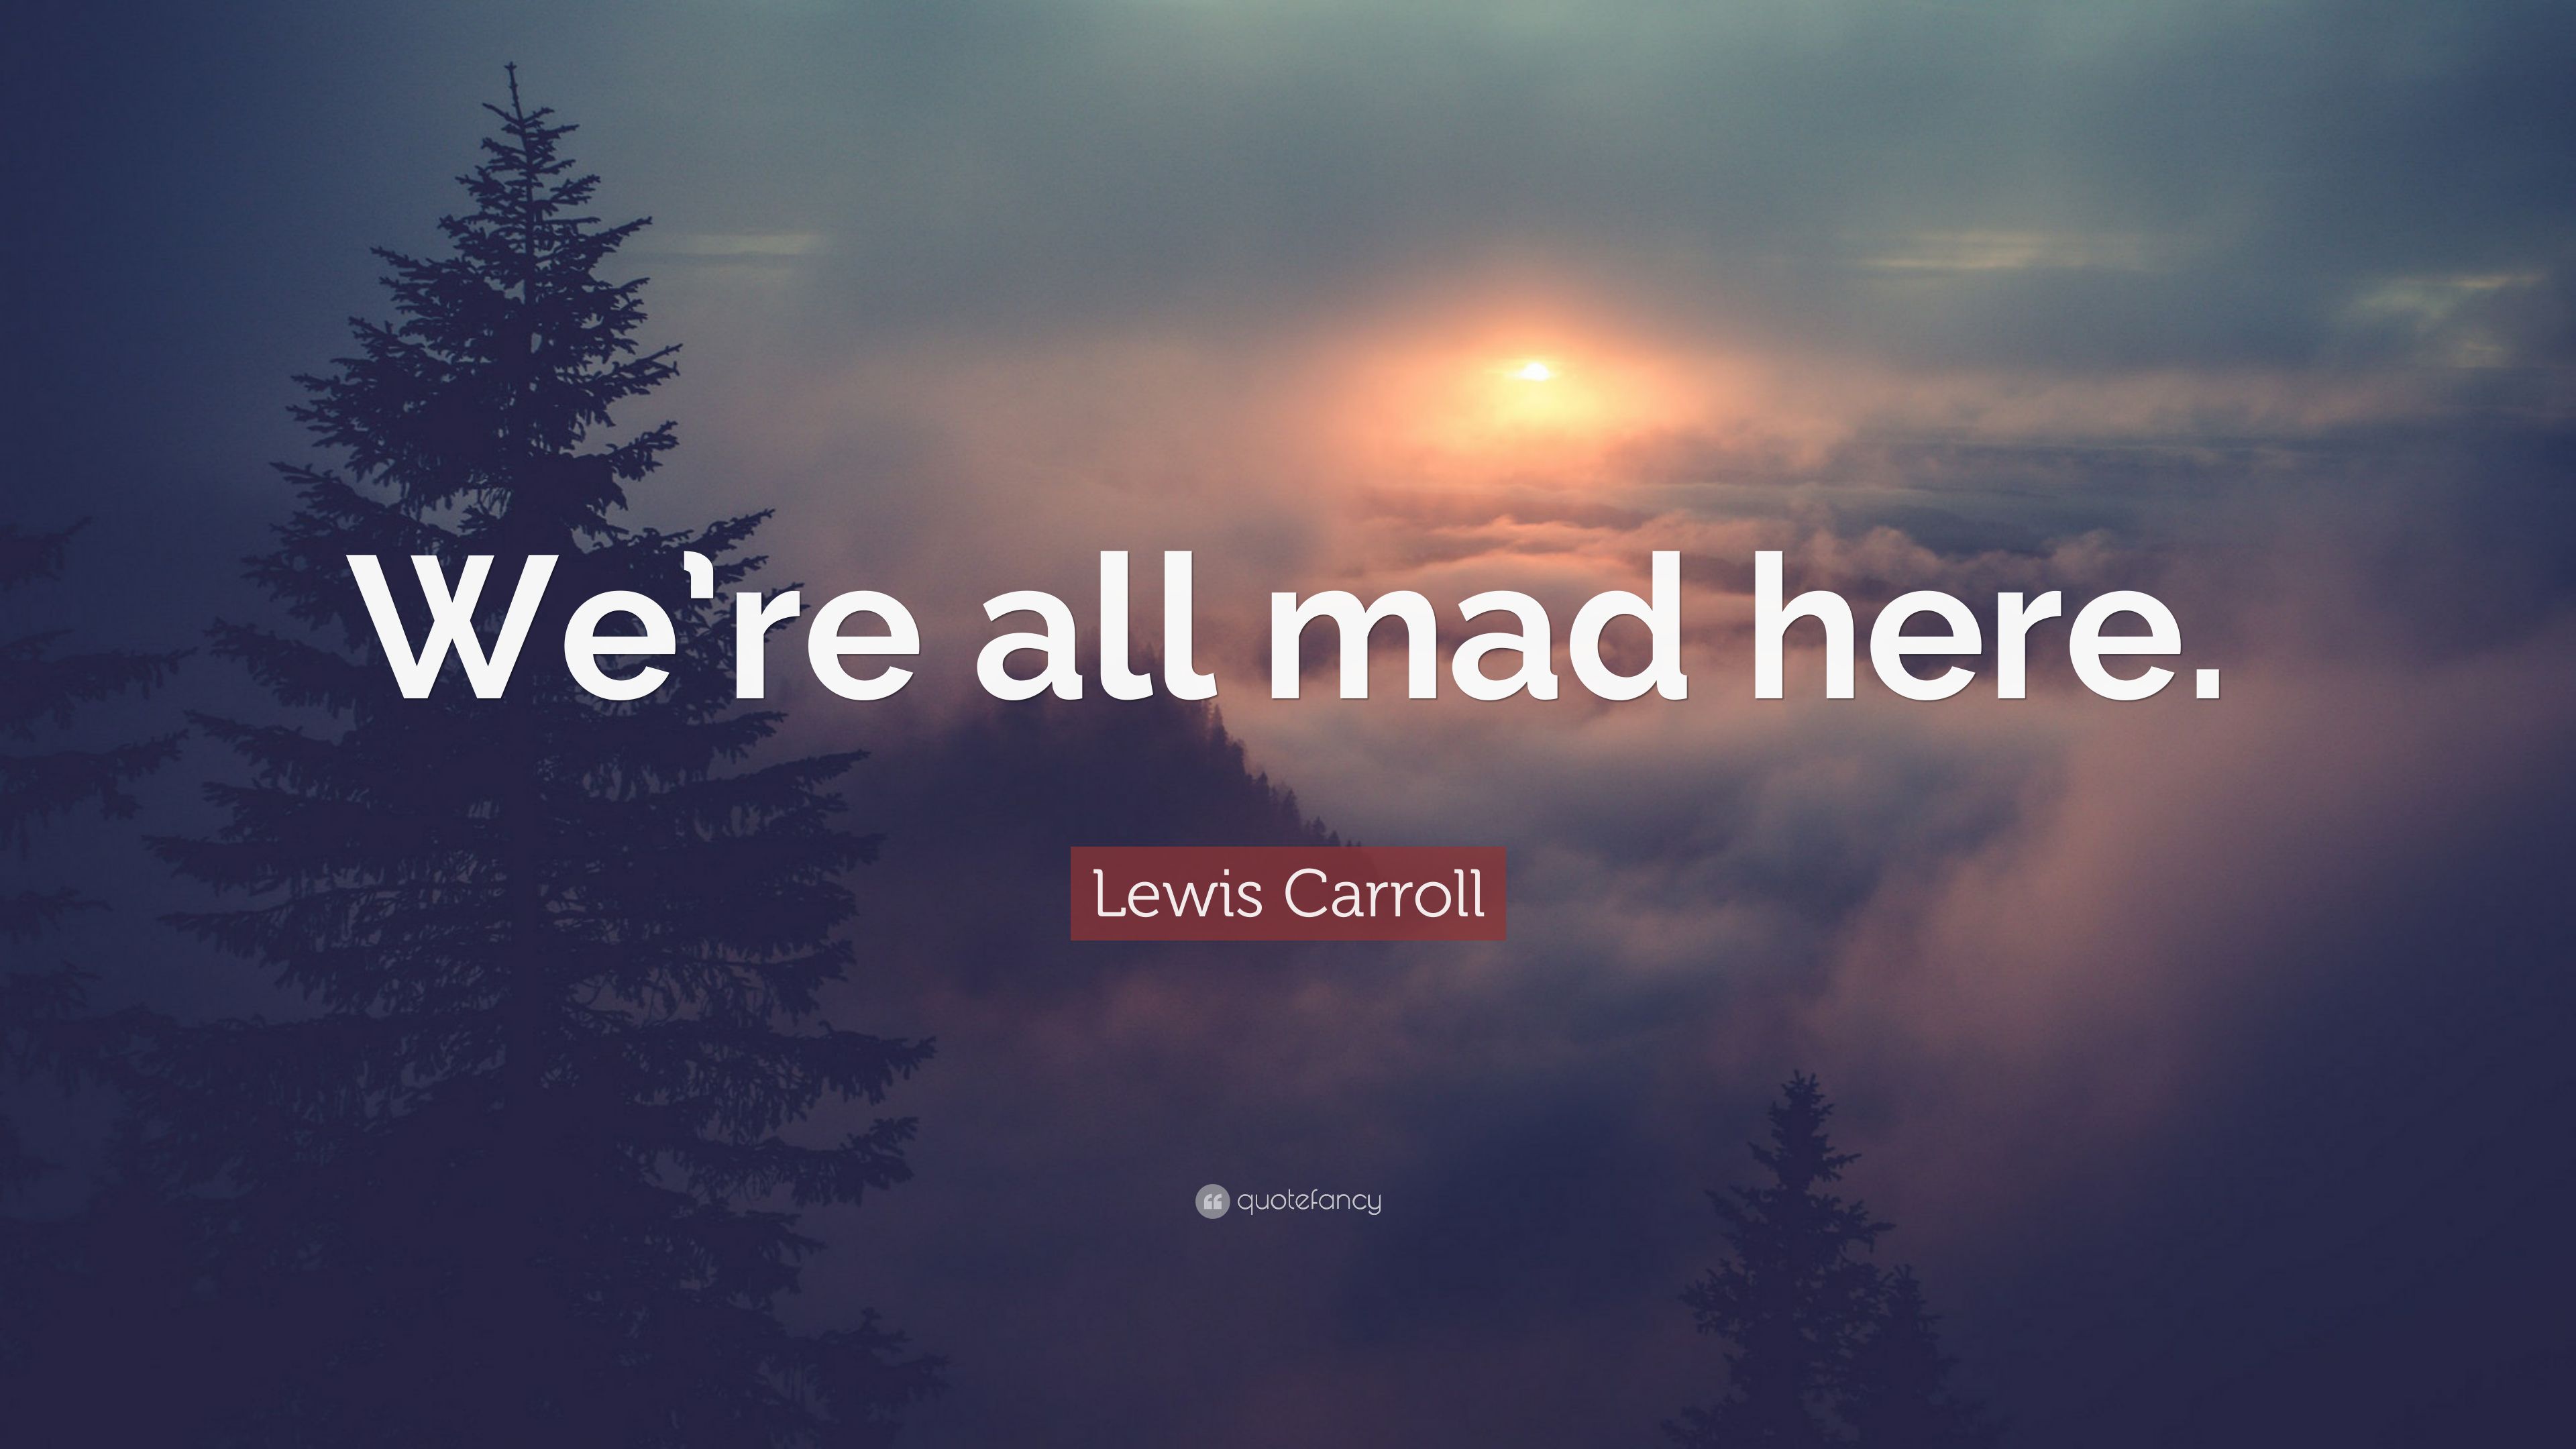 Lewis Carroll Quote: “We're all mad here.” (7 wallpaper)